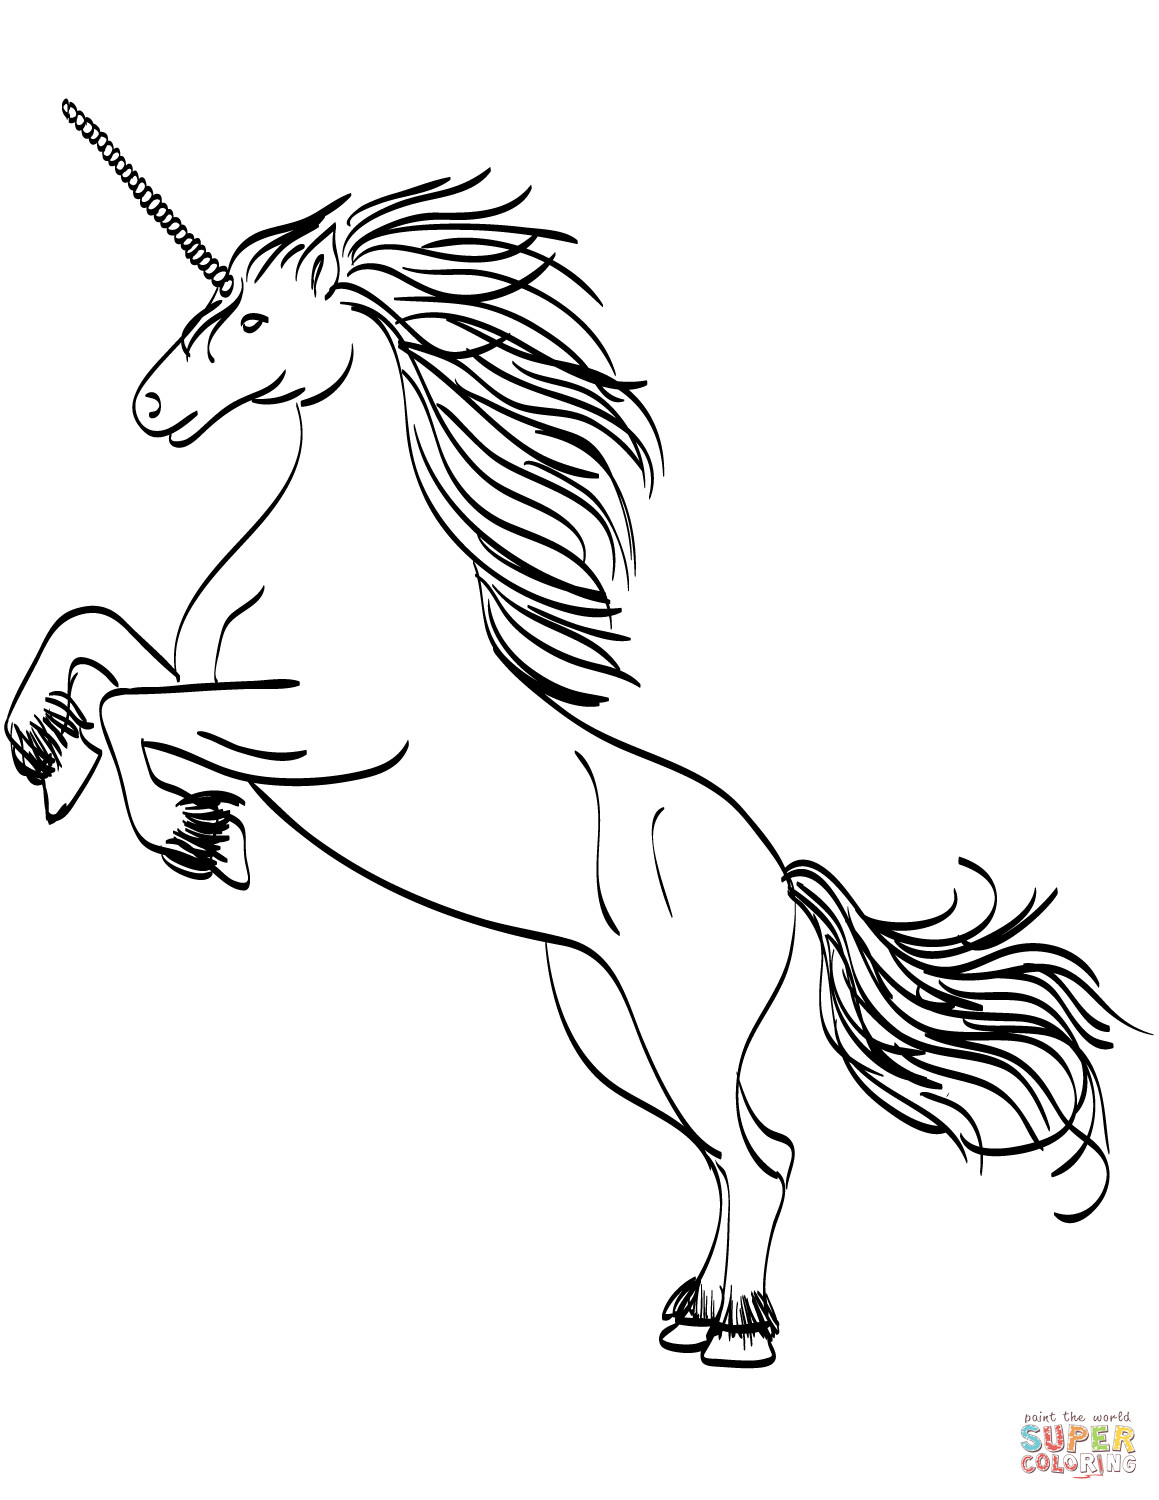 Unicorn Head Coloring Pages at GetColorings.com | Free ...